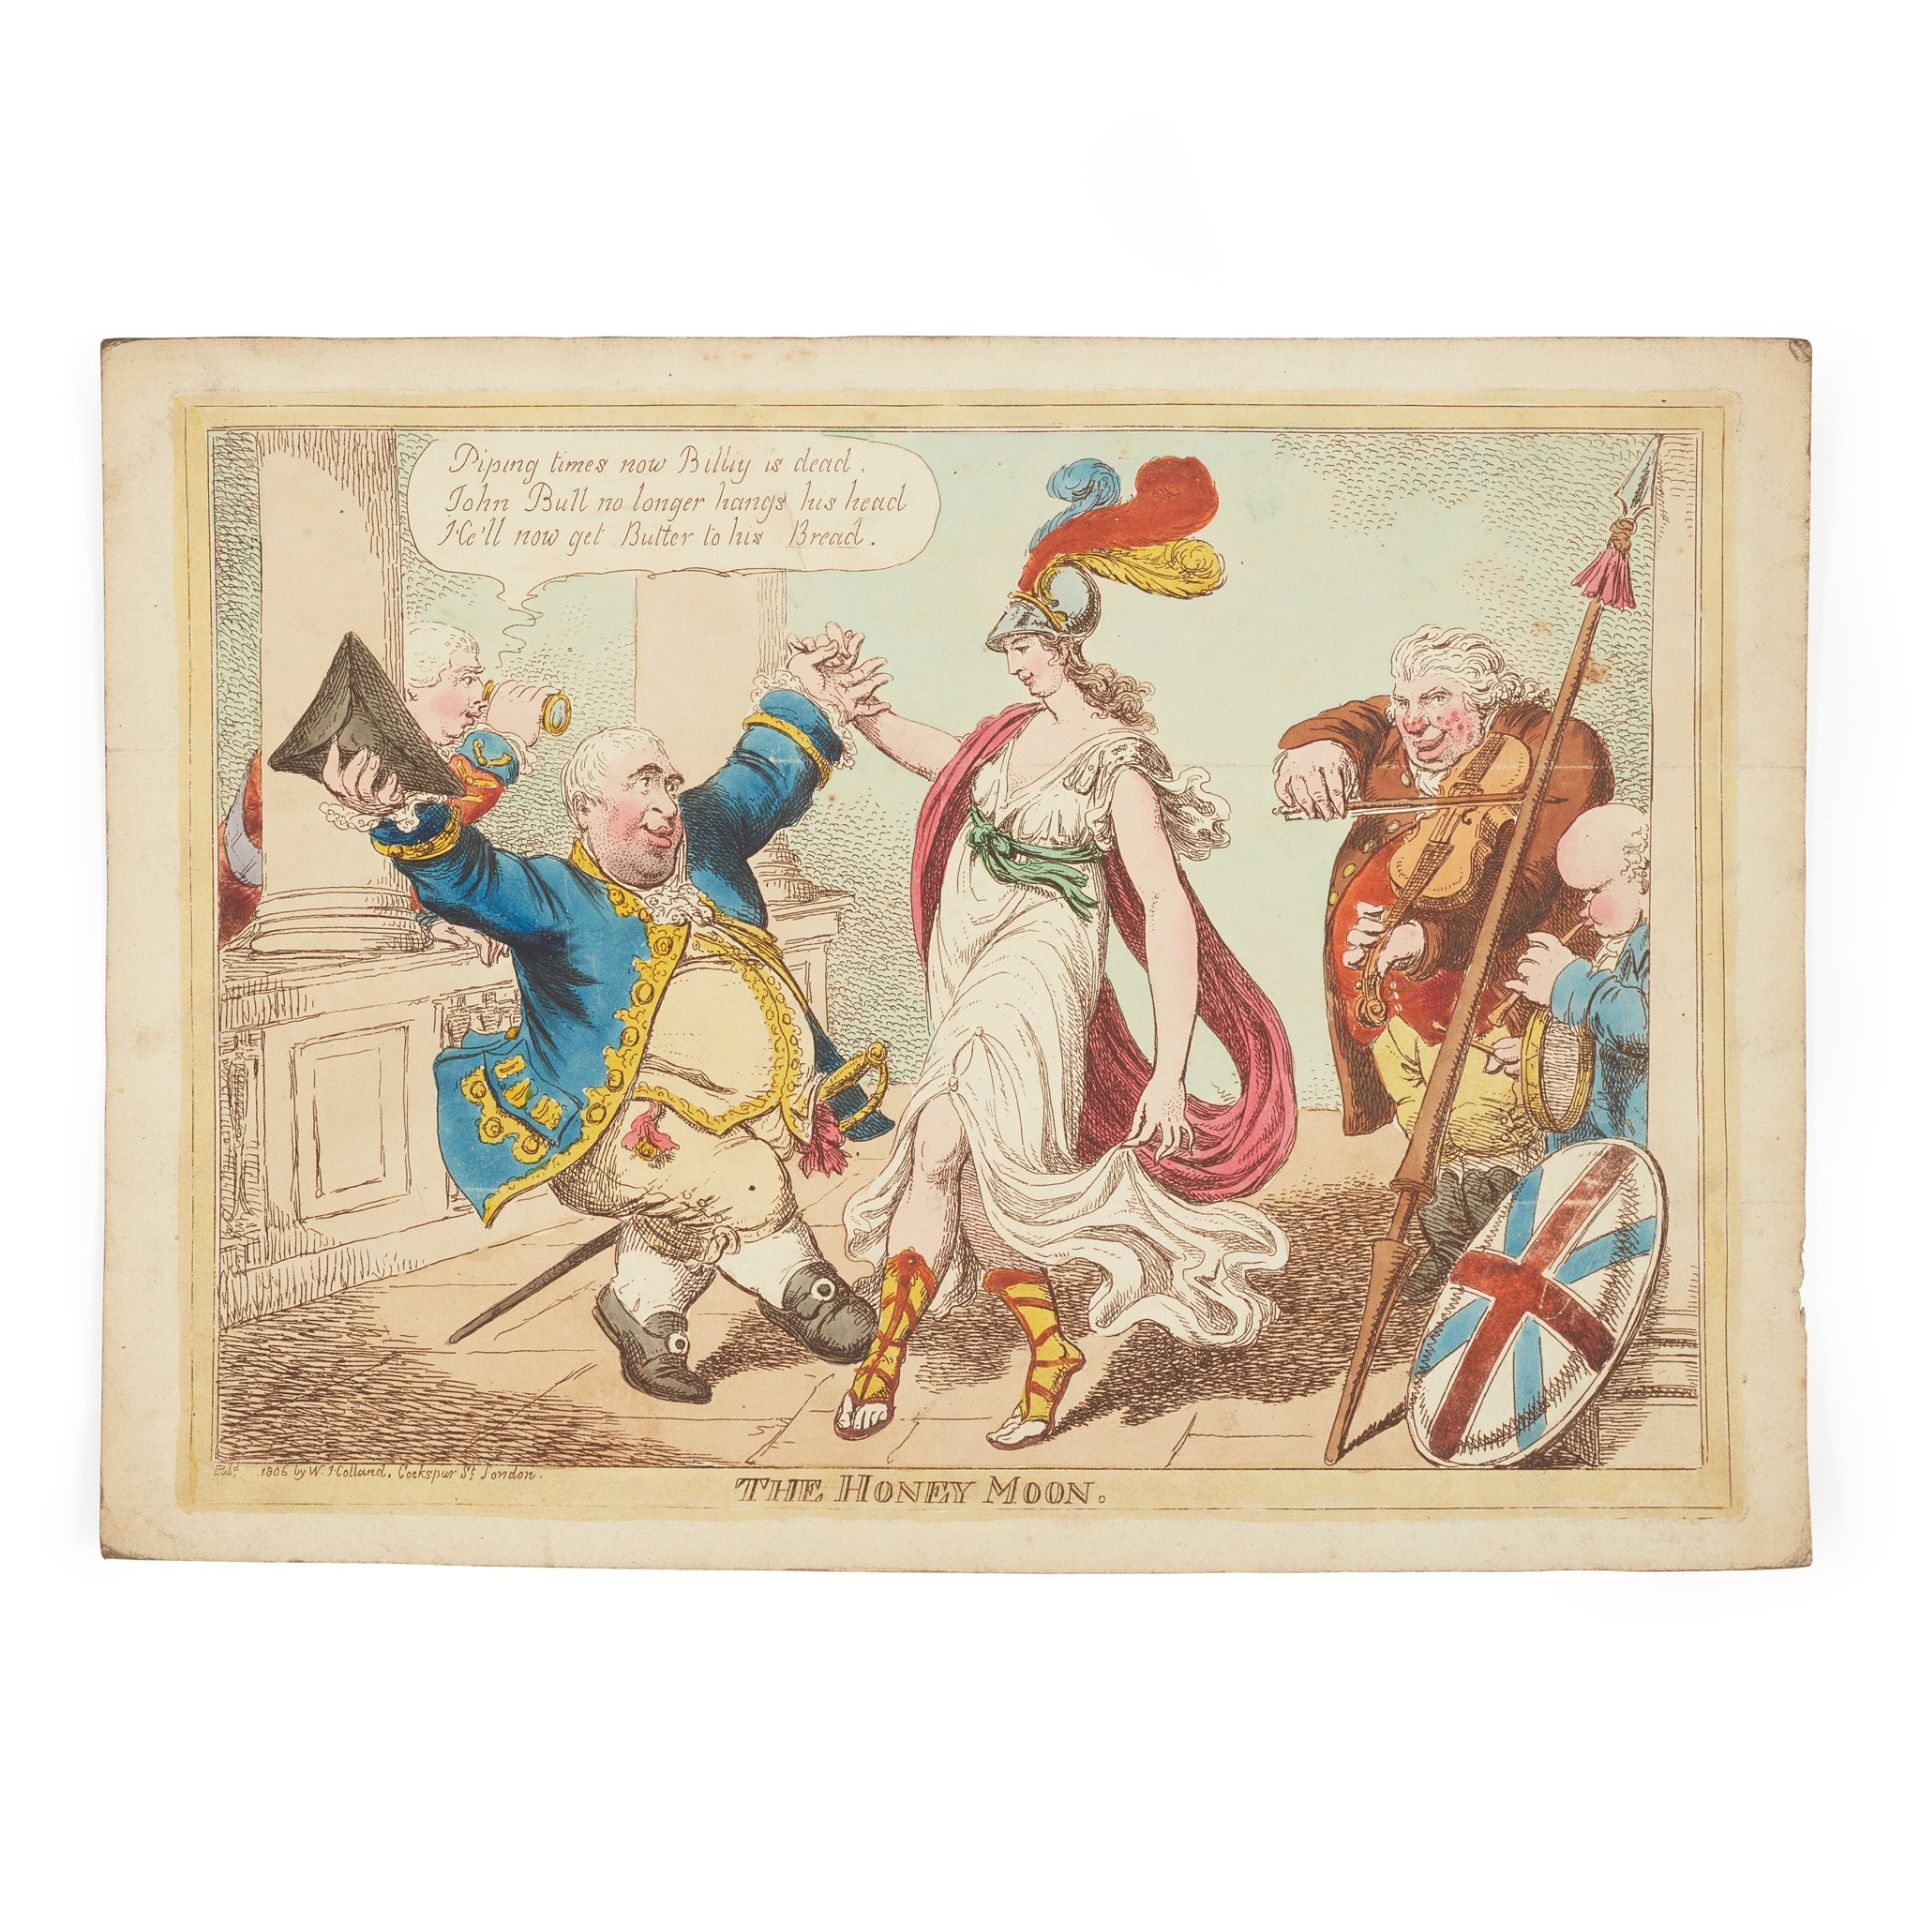 COLLECTION OF SATIRICAL ENGRAVINGS, JAMES GILLRAY AND OTHERS EARLY 19TH CENTURY - Image 10 of 14